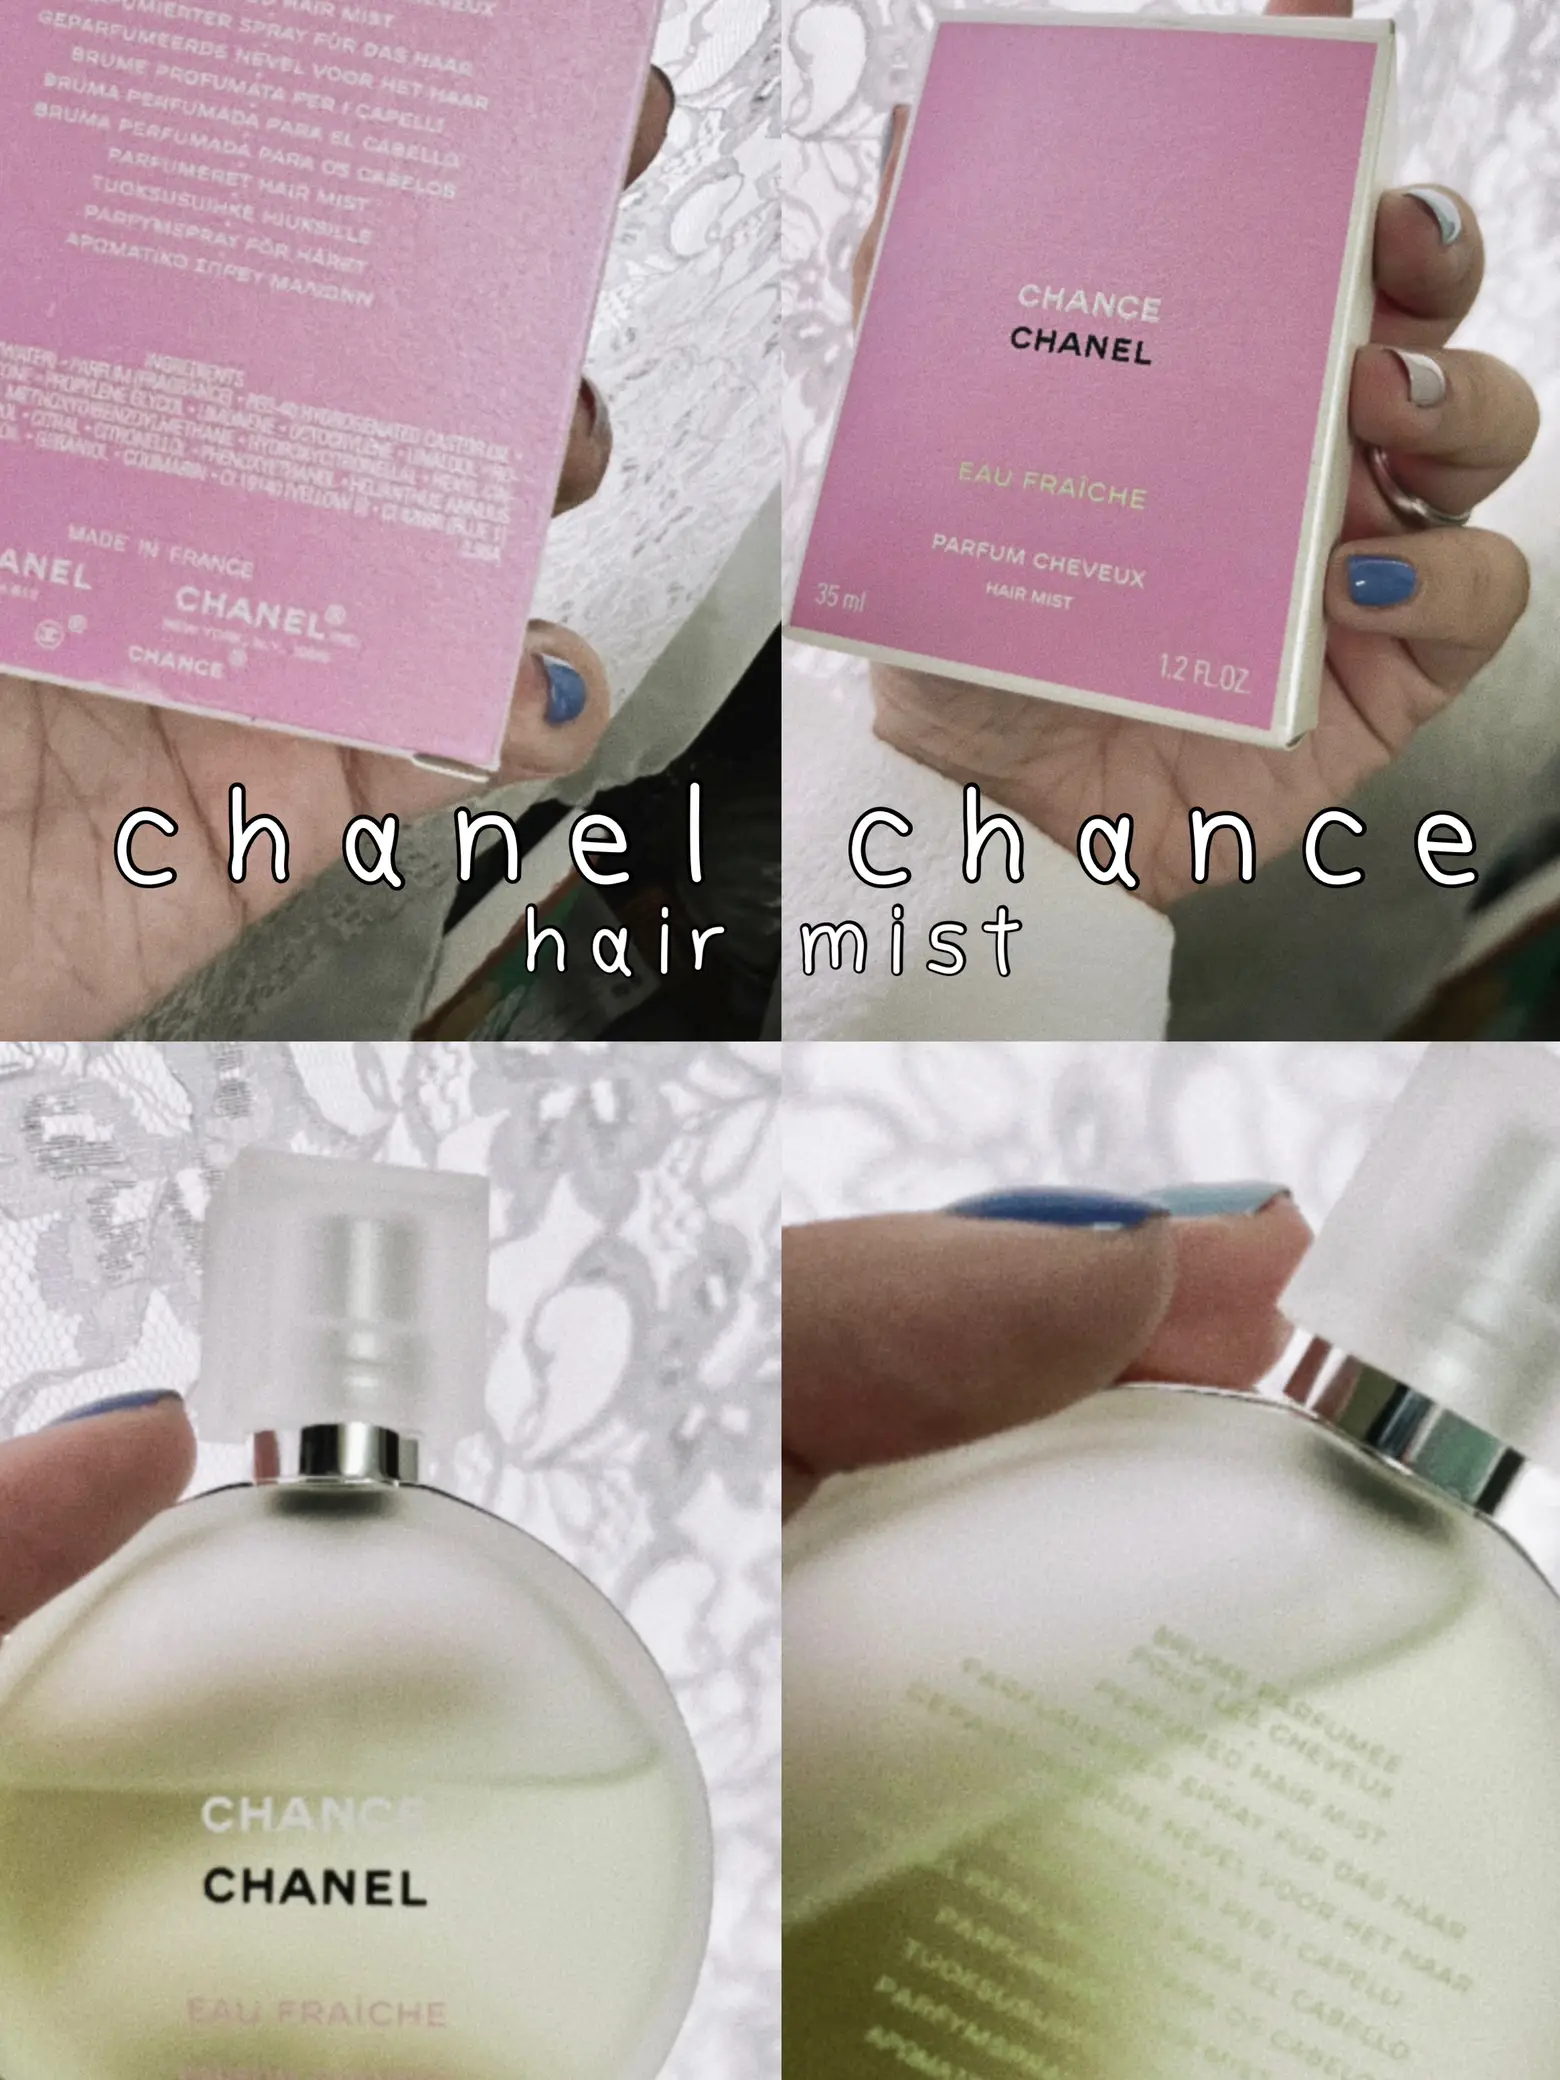 Authentic Chanel Chance Eau Tendre Hair Mist 35ml/1.2oz, Beauty & Personal  Care, Face, Face Care on Carousell